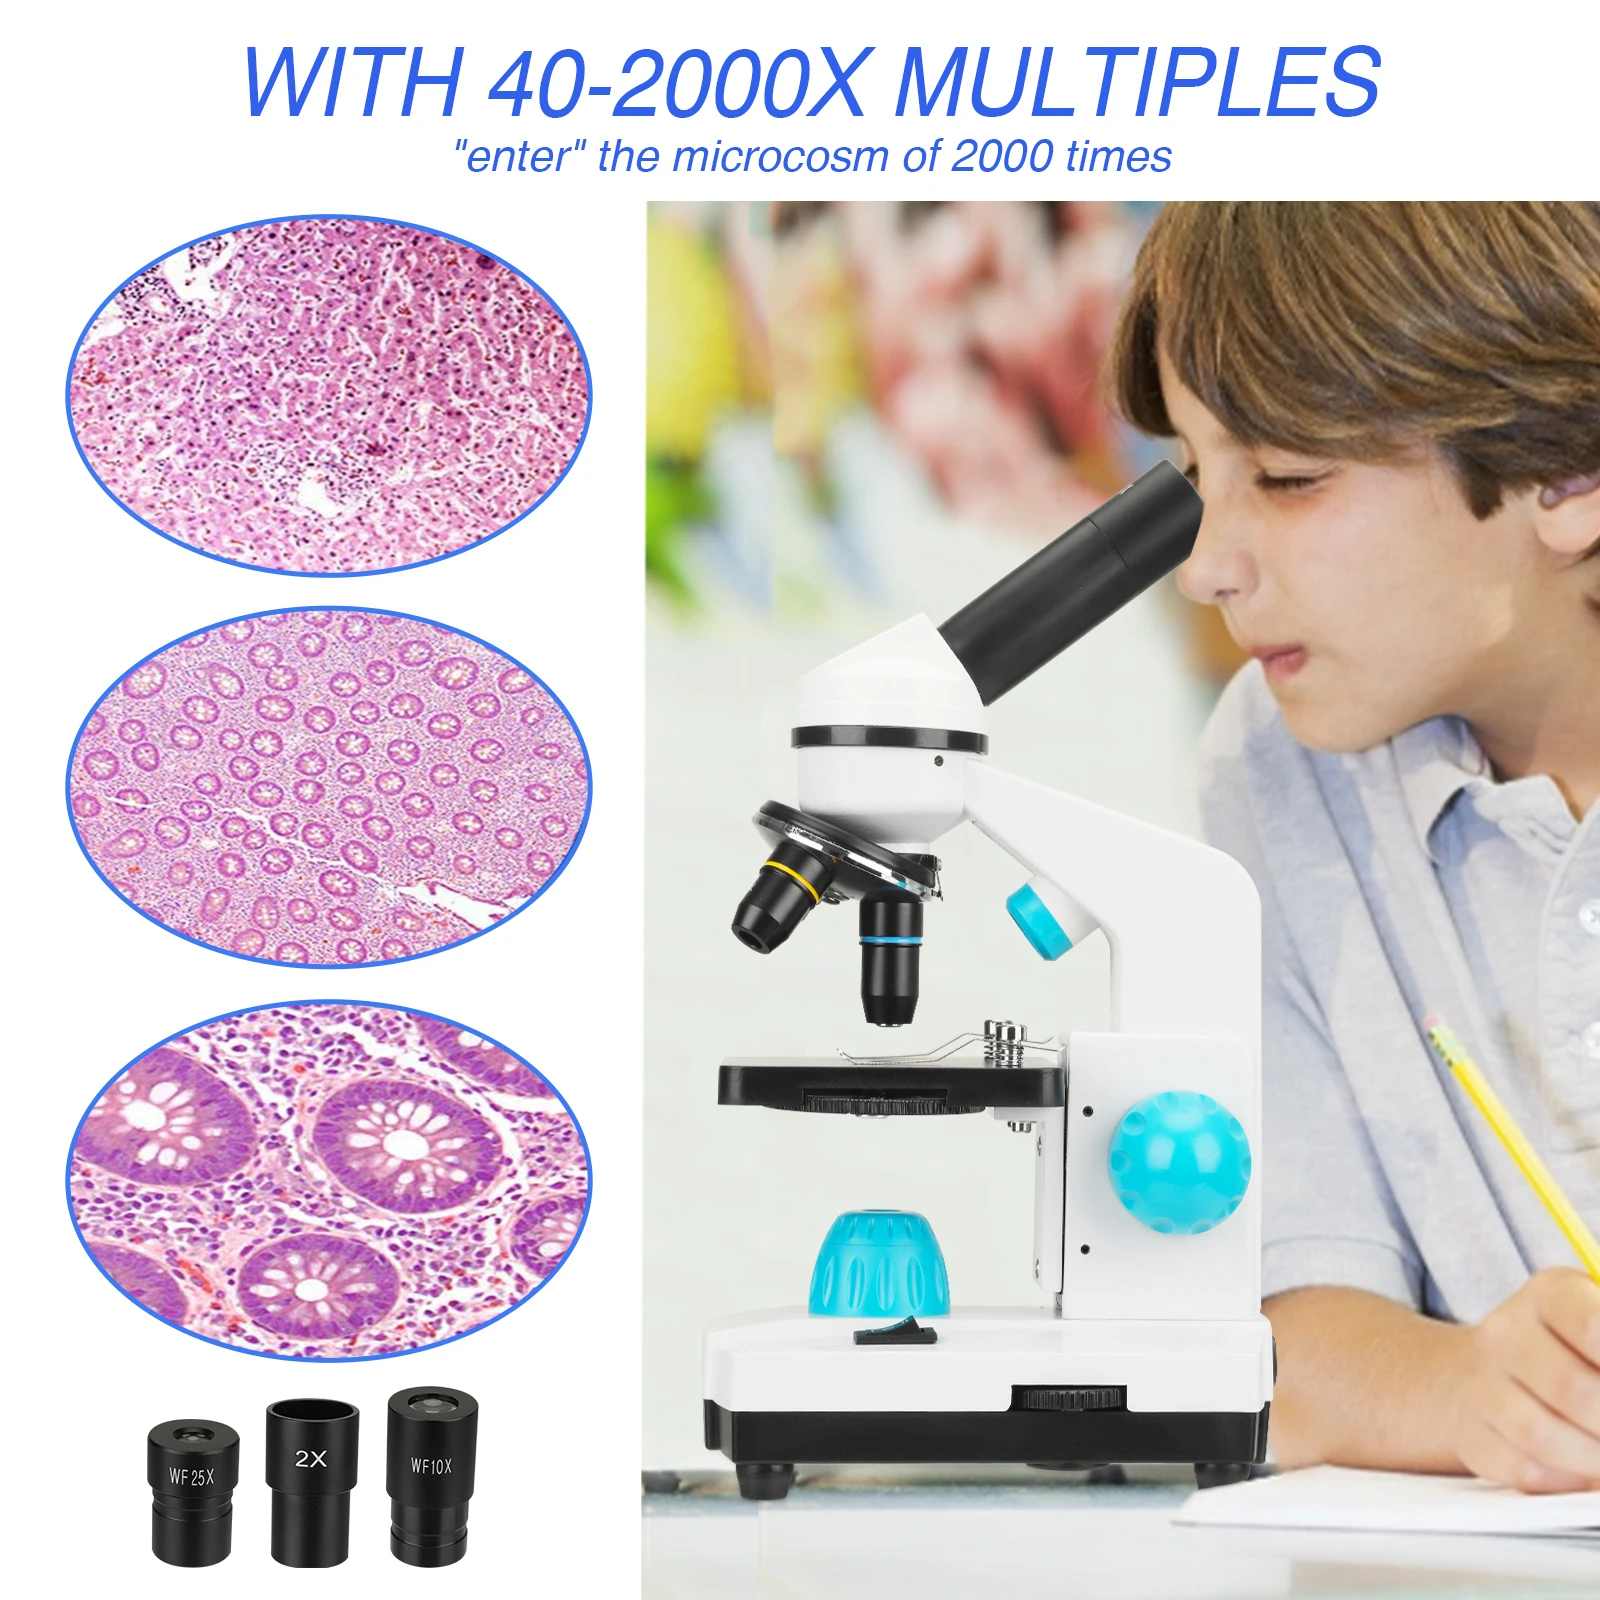 100-2000X Magnification Student Scientific Experiment Biological Microscope Kit Home School Educational Toys Gift For Children